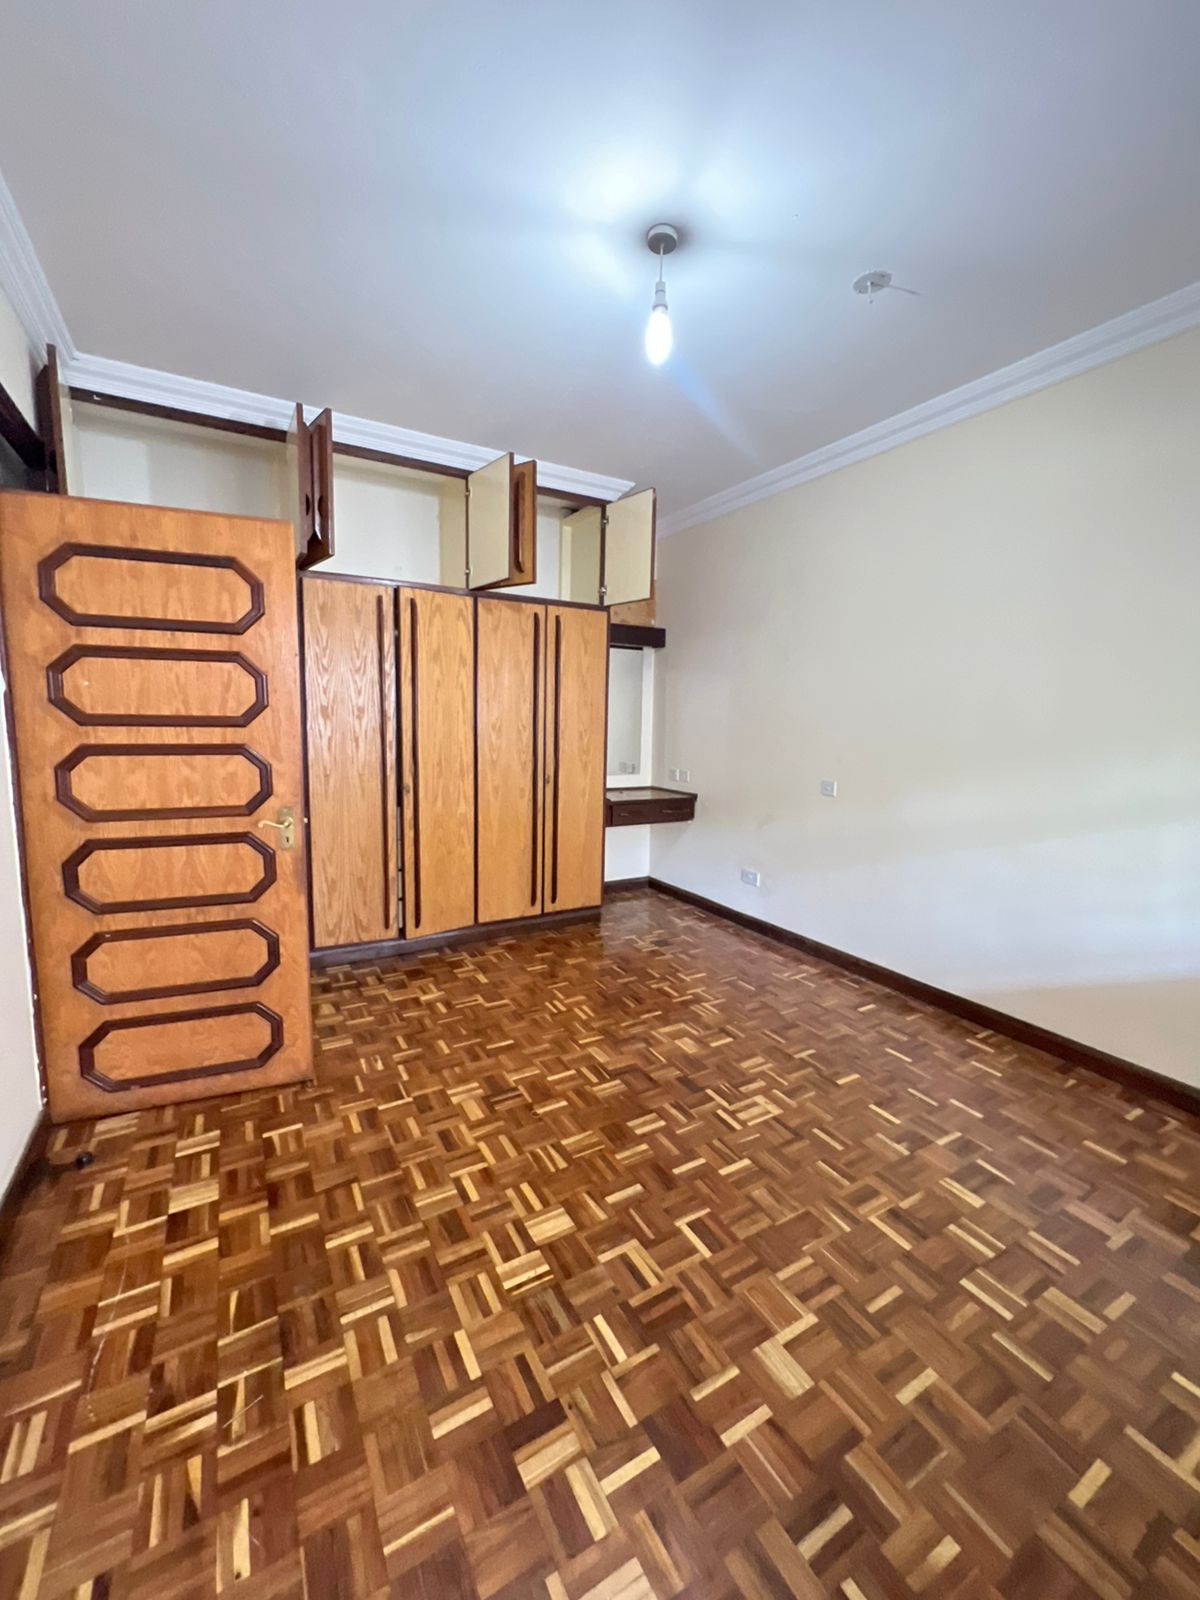 Spacious modern 5 bedroom plus dsq townhouse to let in Lavington, Nairobi. In a Gated community. Few units in the compound. Rent:170K Musilli Homes